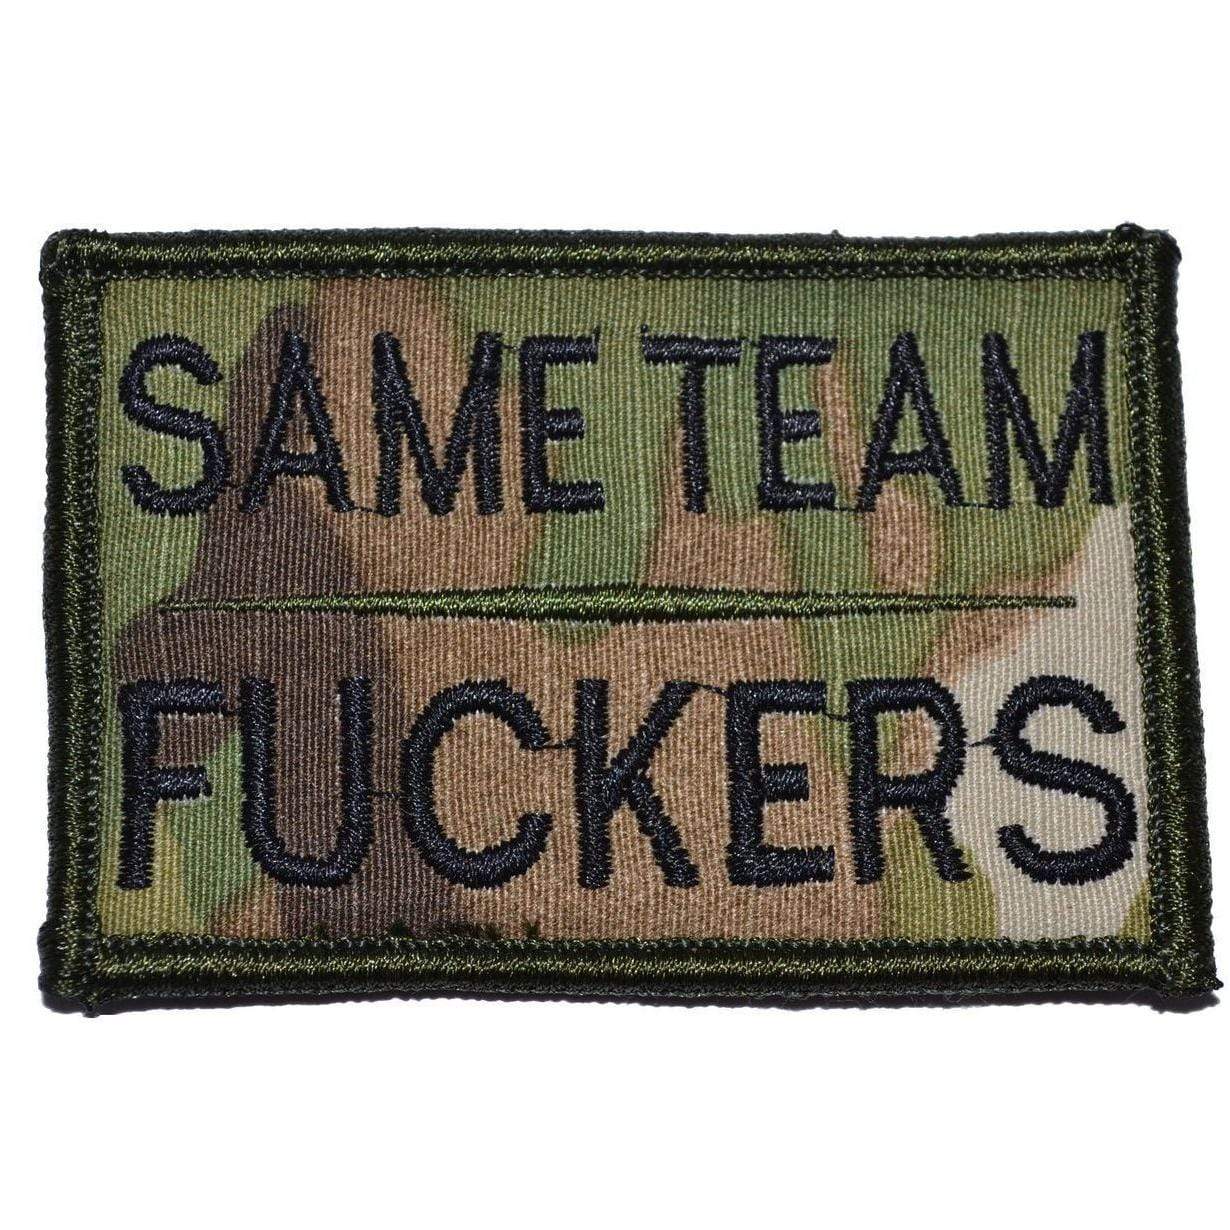 Tactical Gear Junkie Patches MultiCam Same Team Fuckers - 2x3 Patch